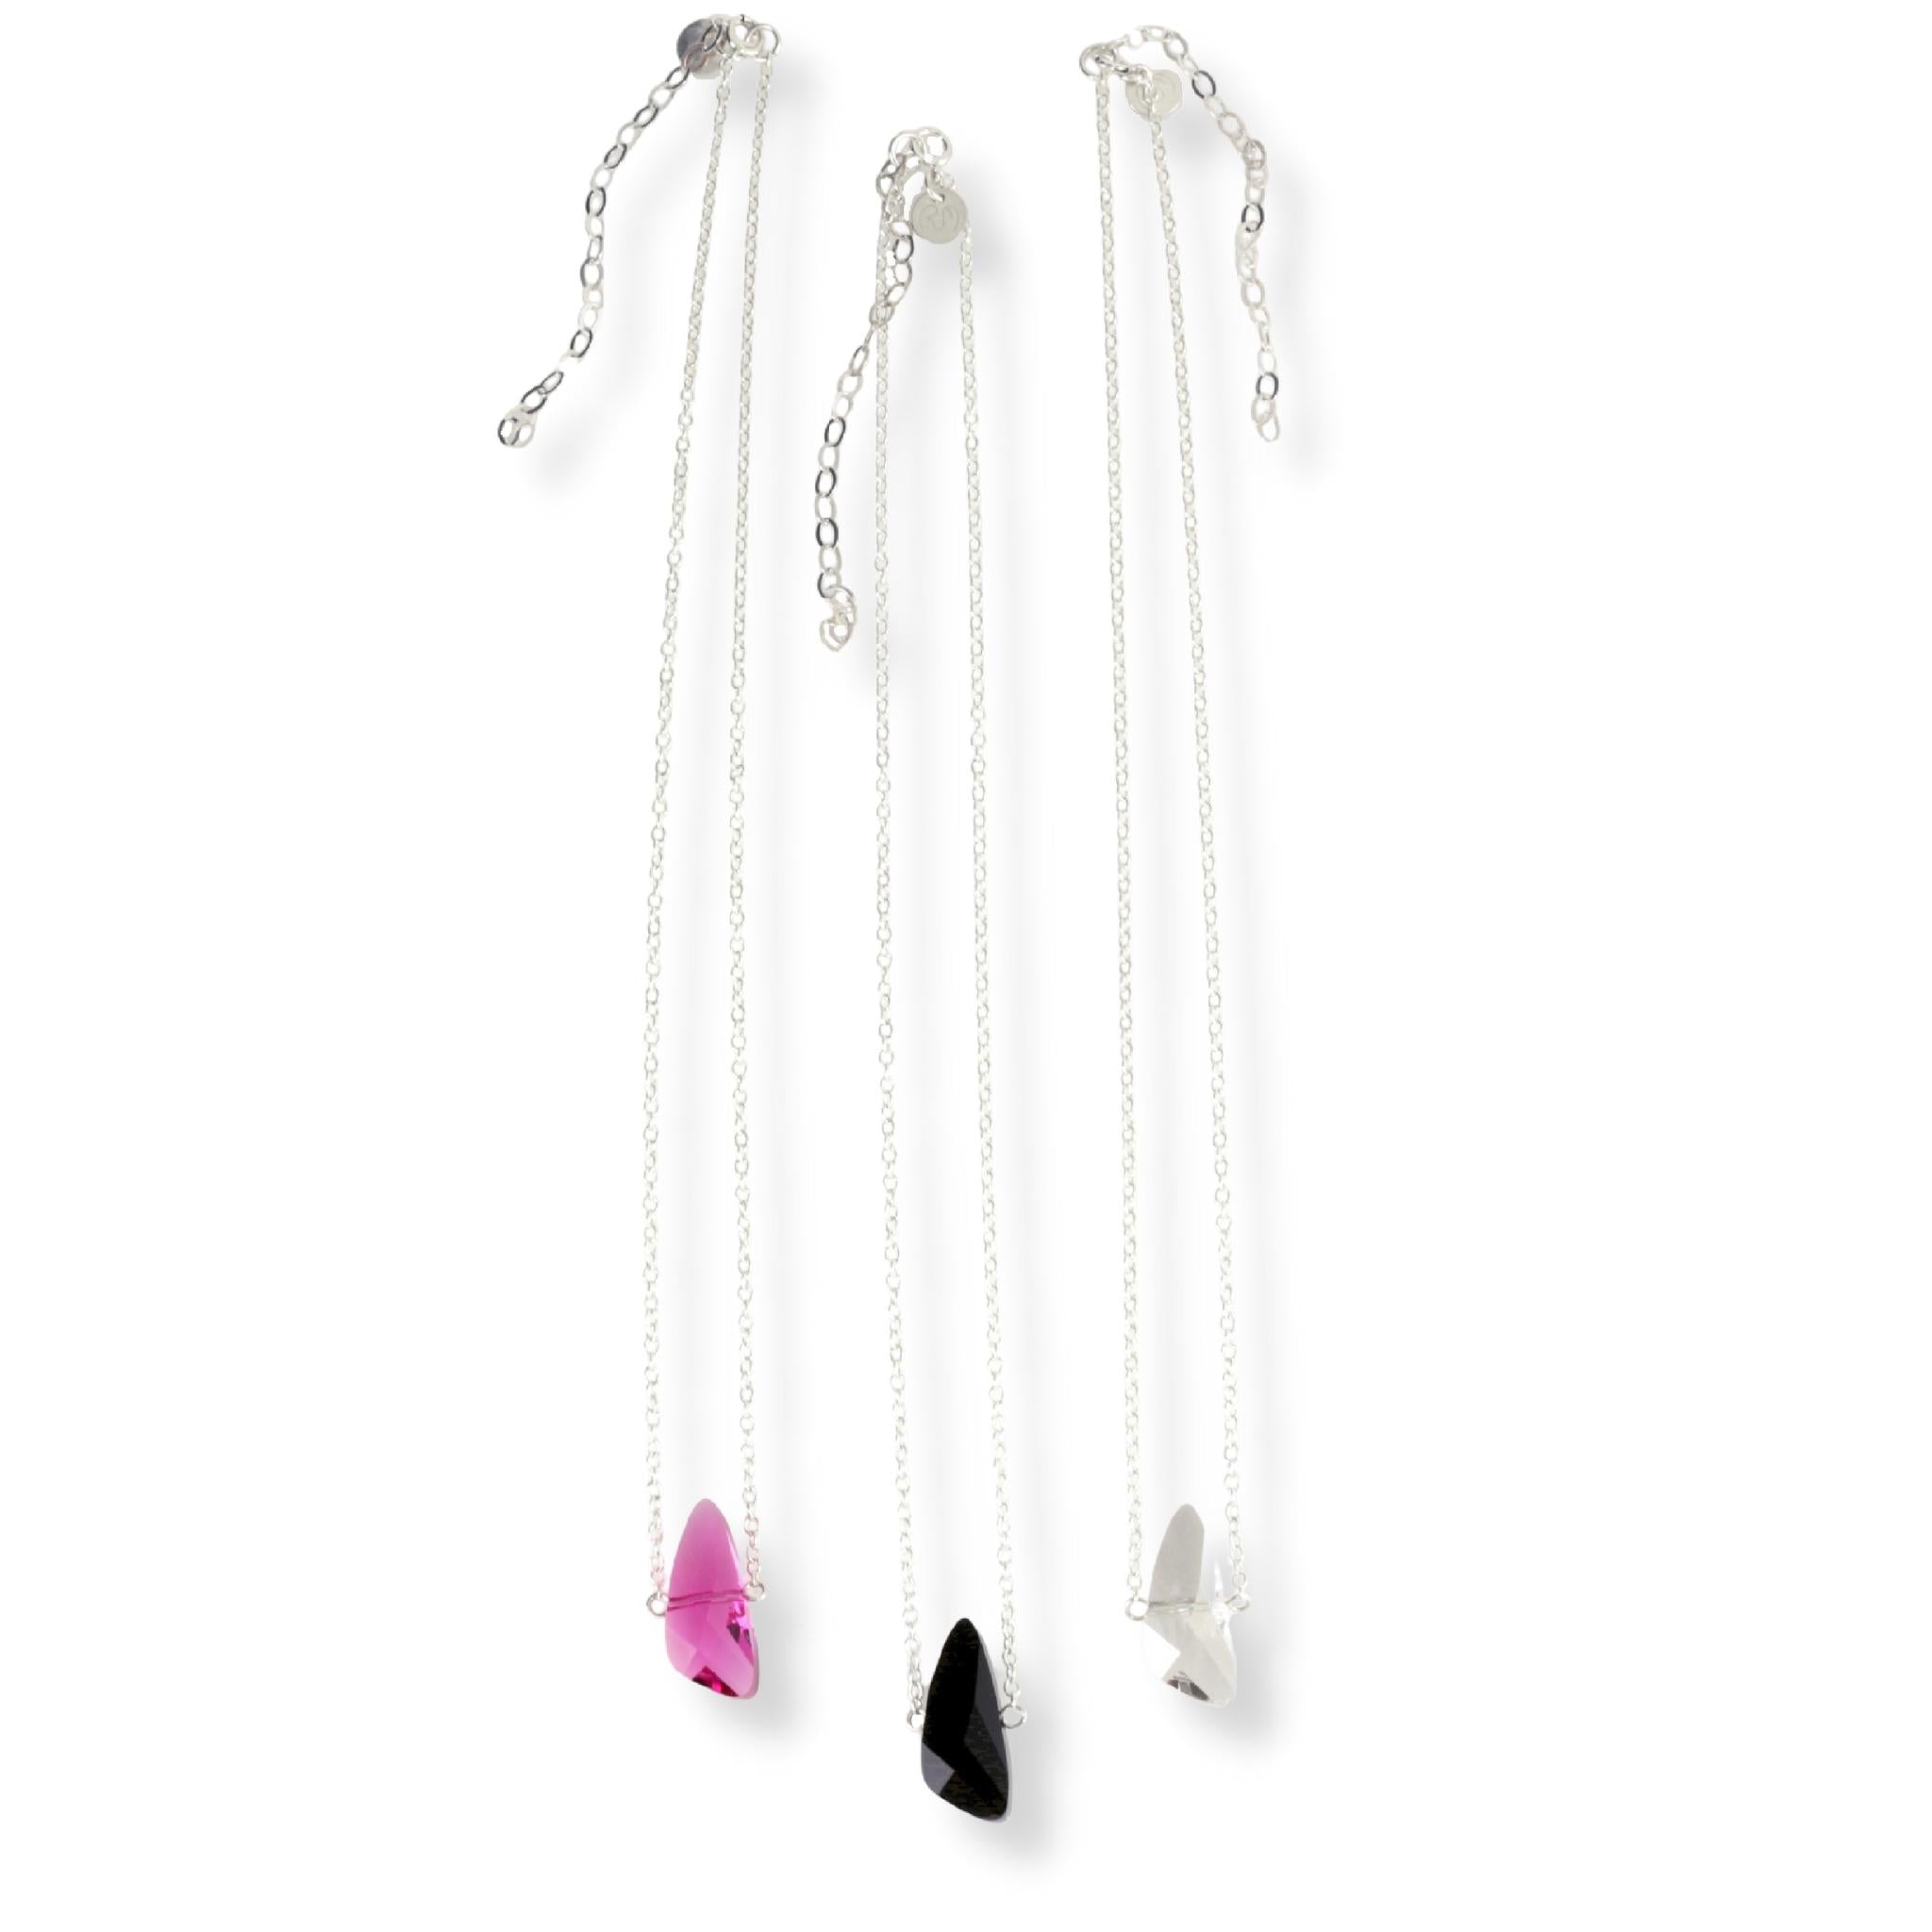 Single Swarovski crystal reflective pendant necklaces on a sterling silver chain. Crystal pendants come in either fuchsia, jet black, or silver shade (clear) color